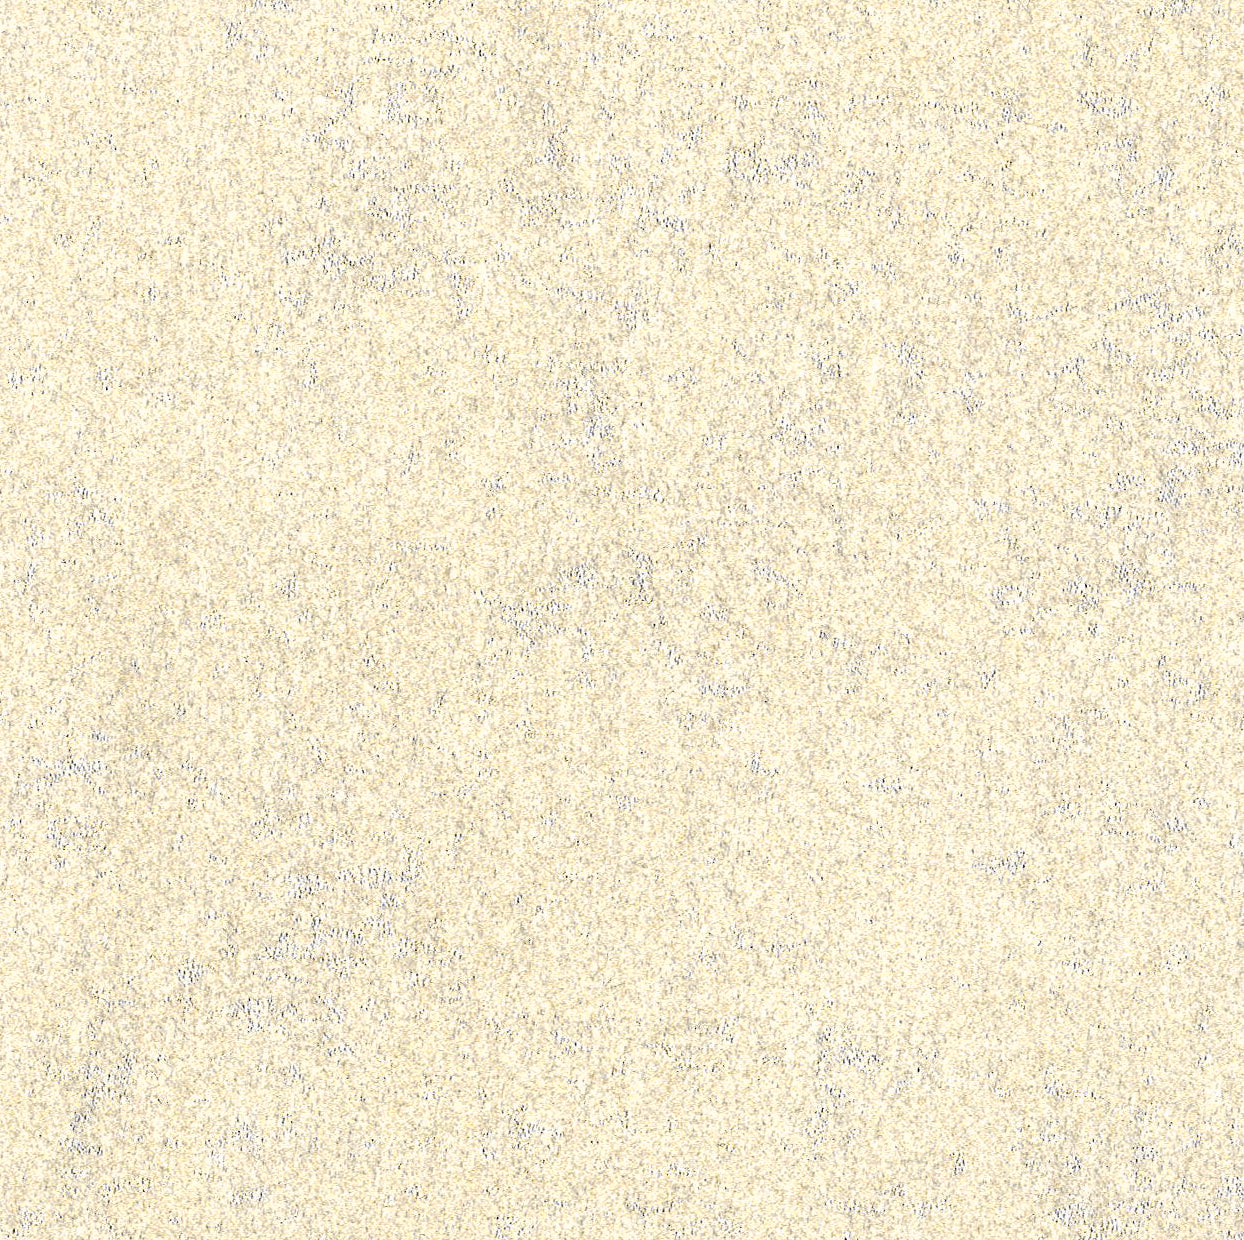 38008-01 White, Gold Polyester Foil Washed 100% foil gold polyester stretch washed white woven Foil - knit fabric - woven fabric - fabric company - fabric wholesale - fabric b2b - fabric factory - high quality fabric - hong kong fabric - fabric hk - acetate fabric - cotton fabric - linen fabric - metallic fabric - nylon fabric - polyester fabric - spandex fabric - chun wing hing - cwh hk - fabric worldwide ship - 針織布 - 梳織布 - 布料公司- 布料批發 - 香港布料 - 秦榮興